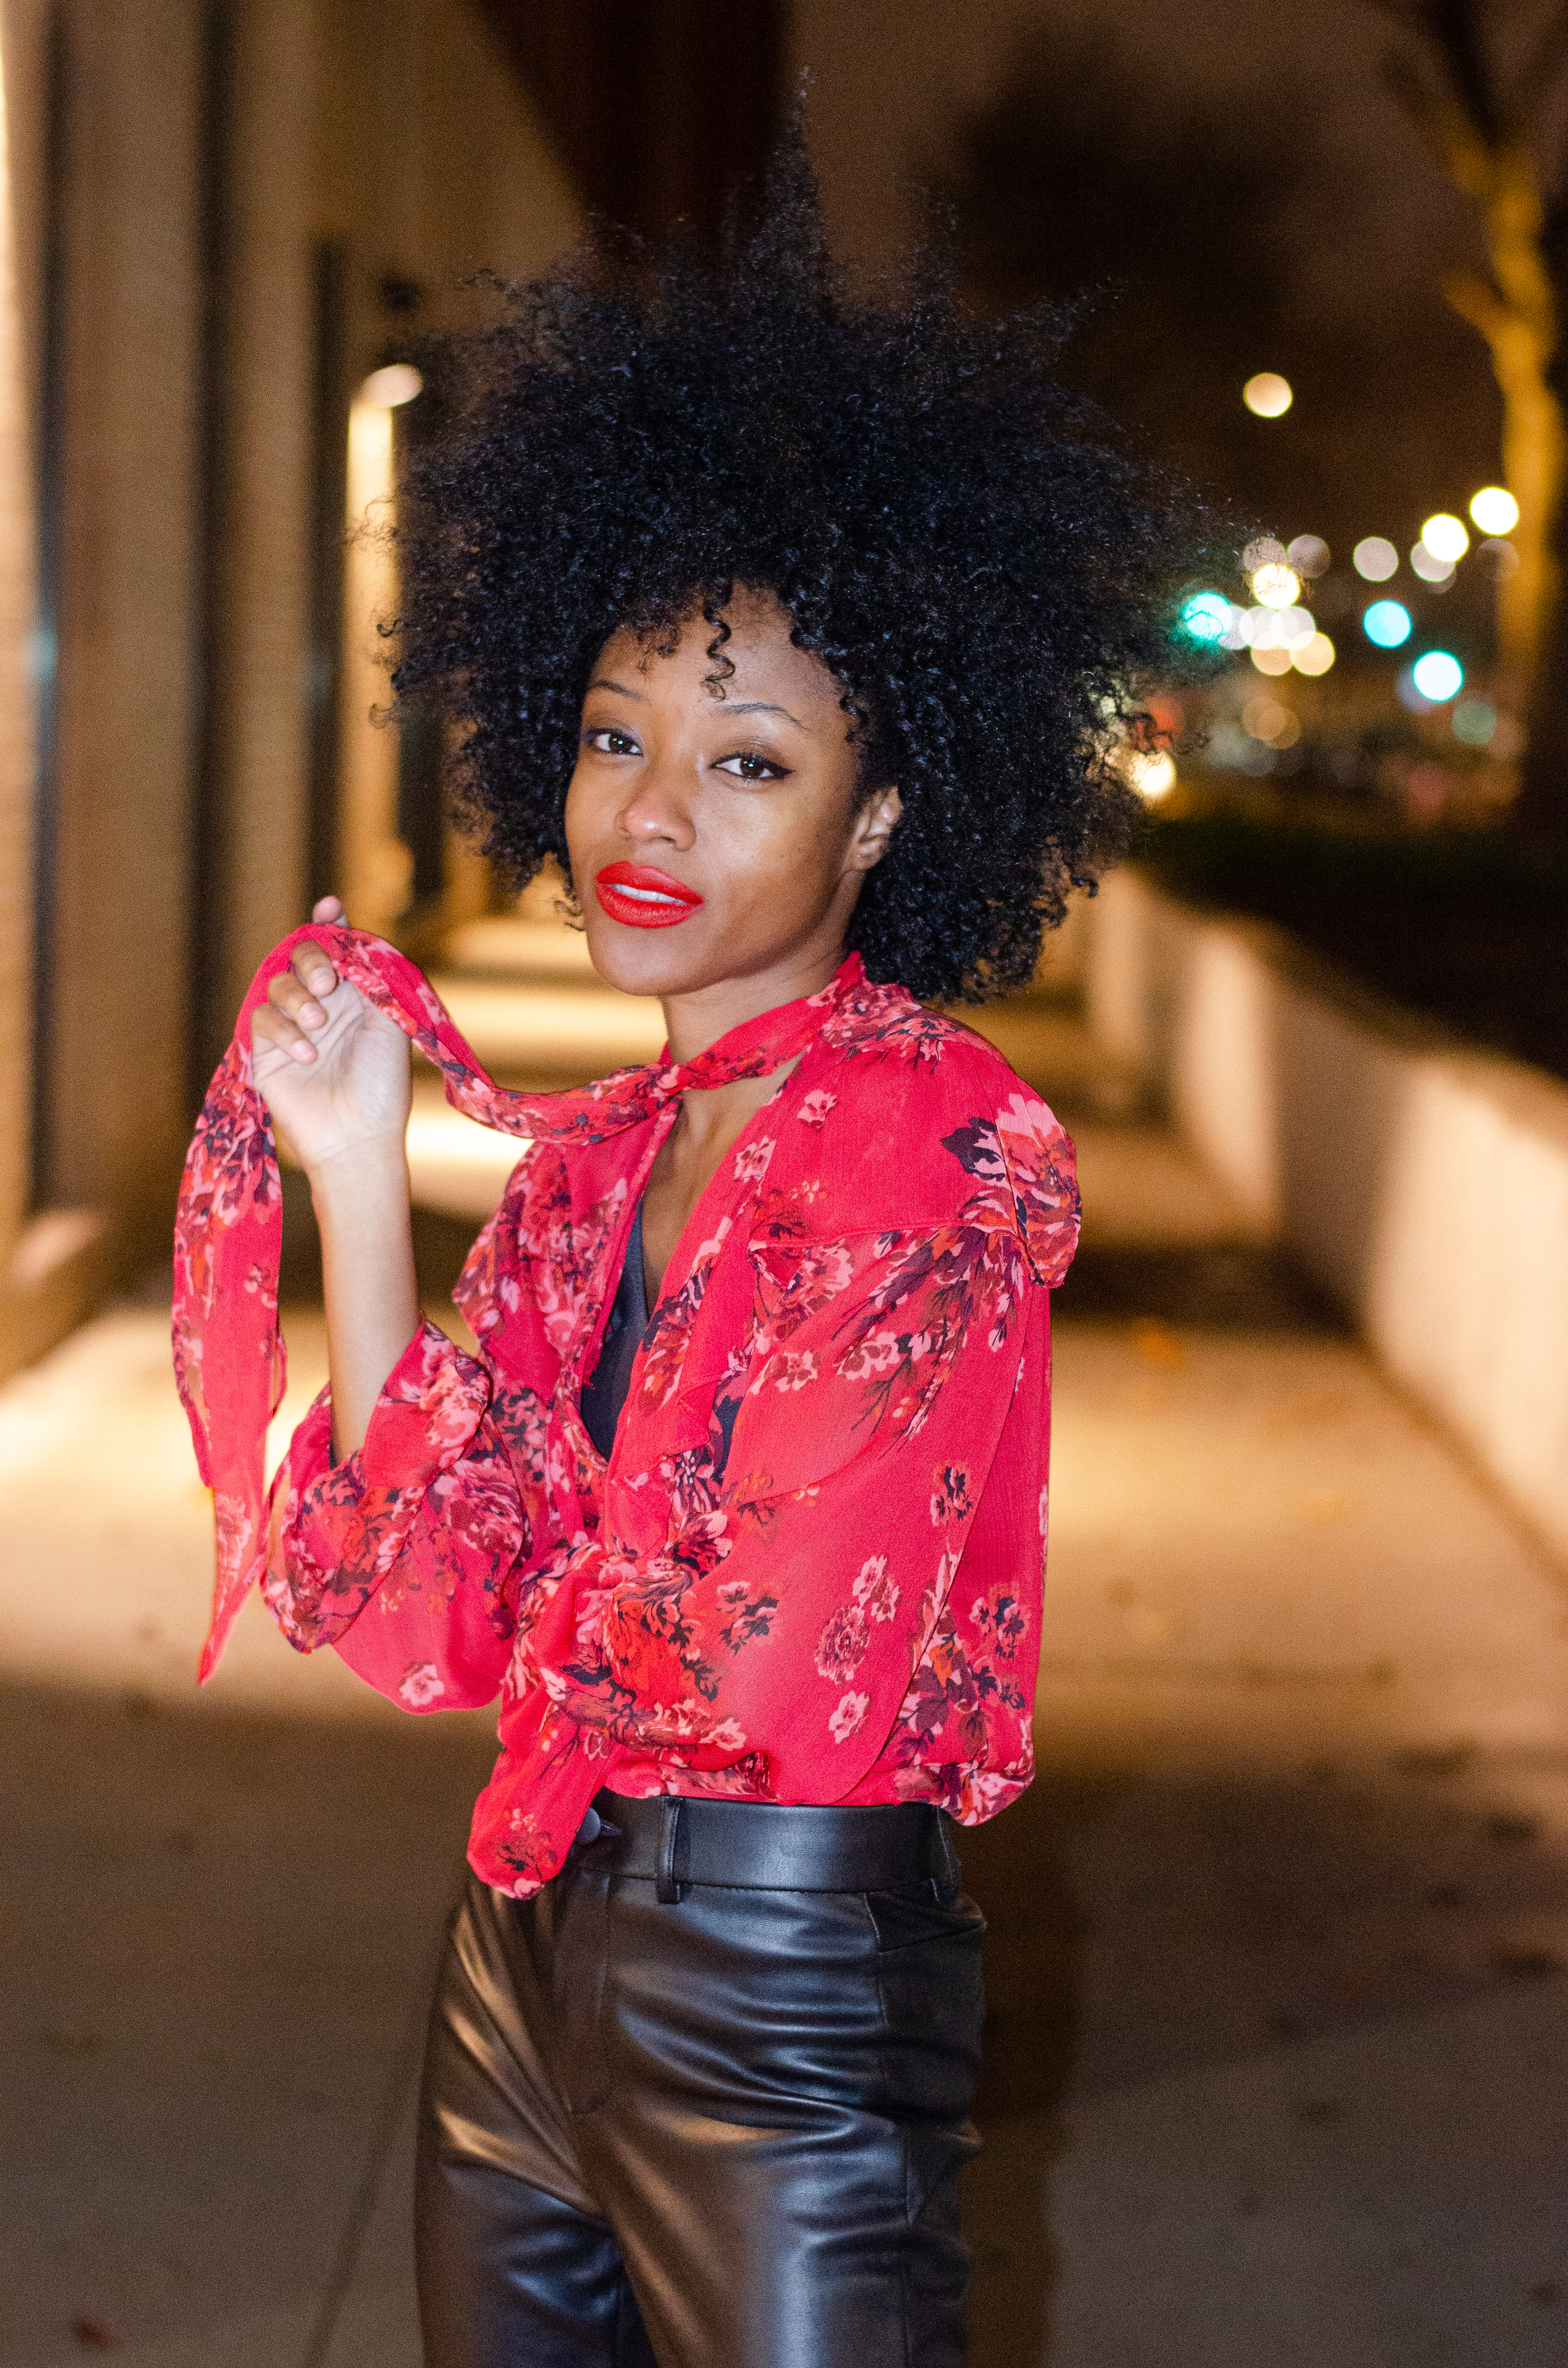 Fashion blogger Kamara Williams shares her fashion girl gift guide for the best gifts for the style lover in your life